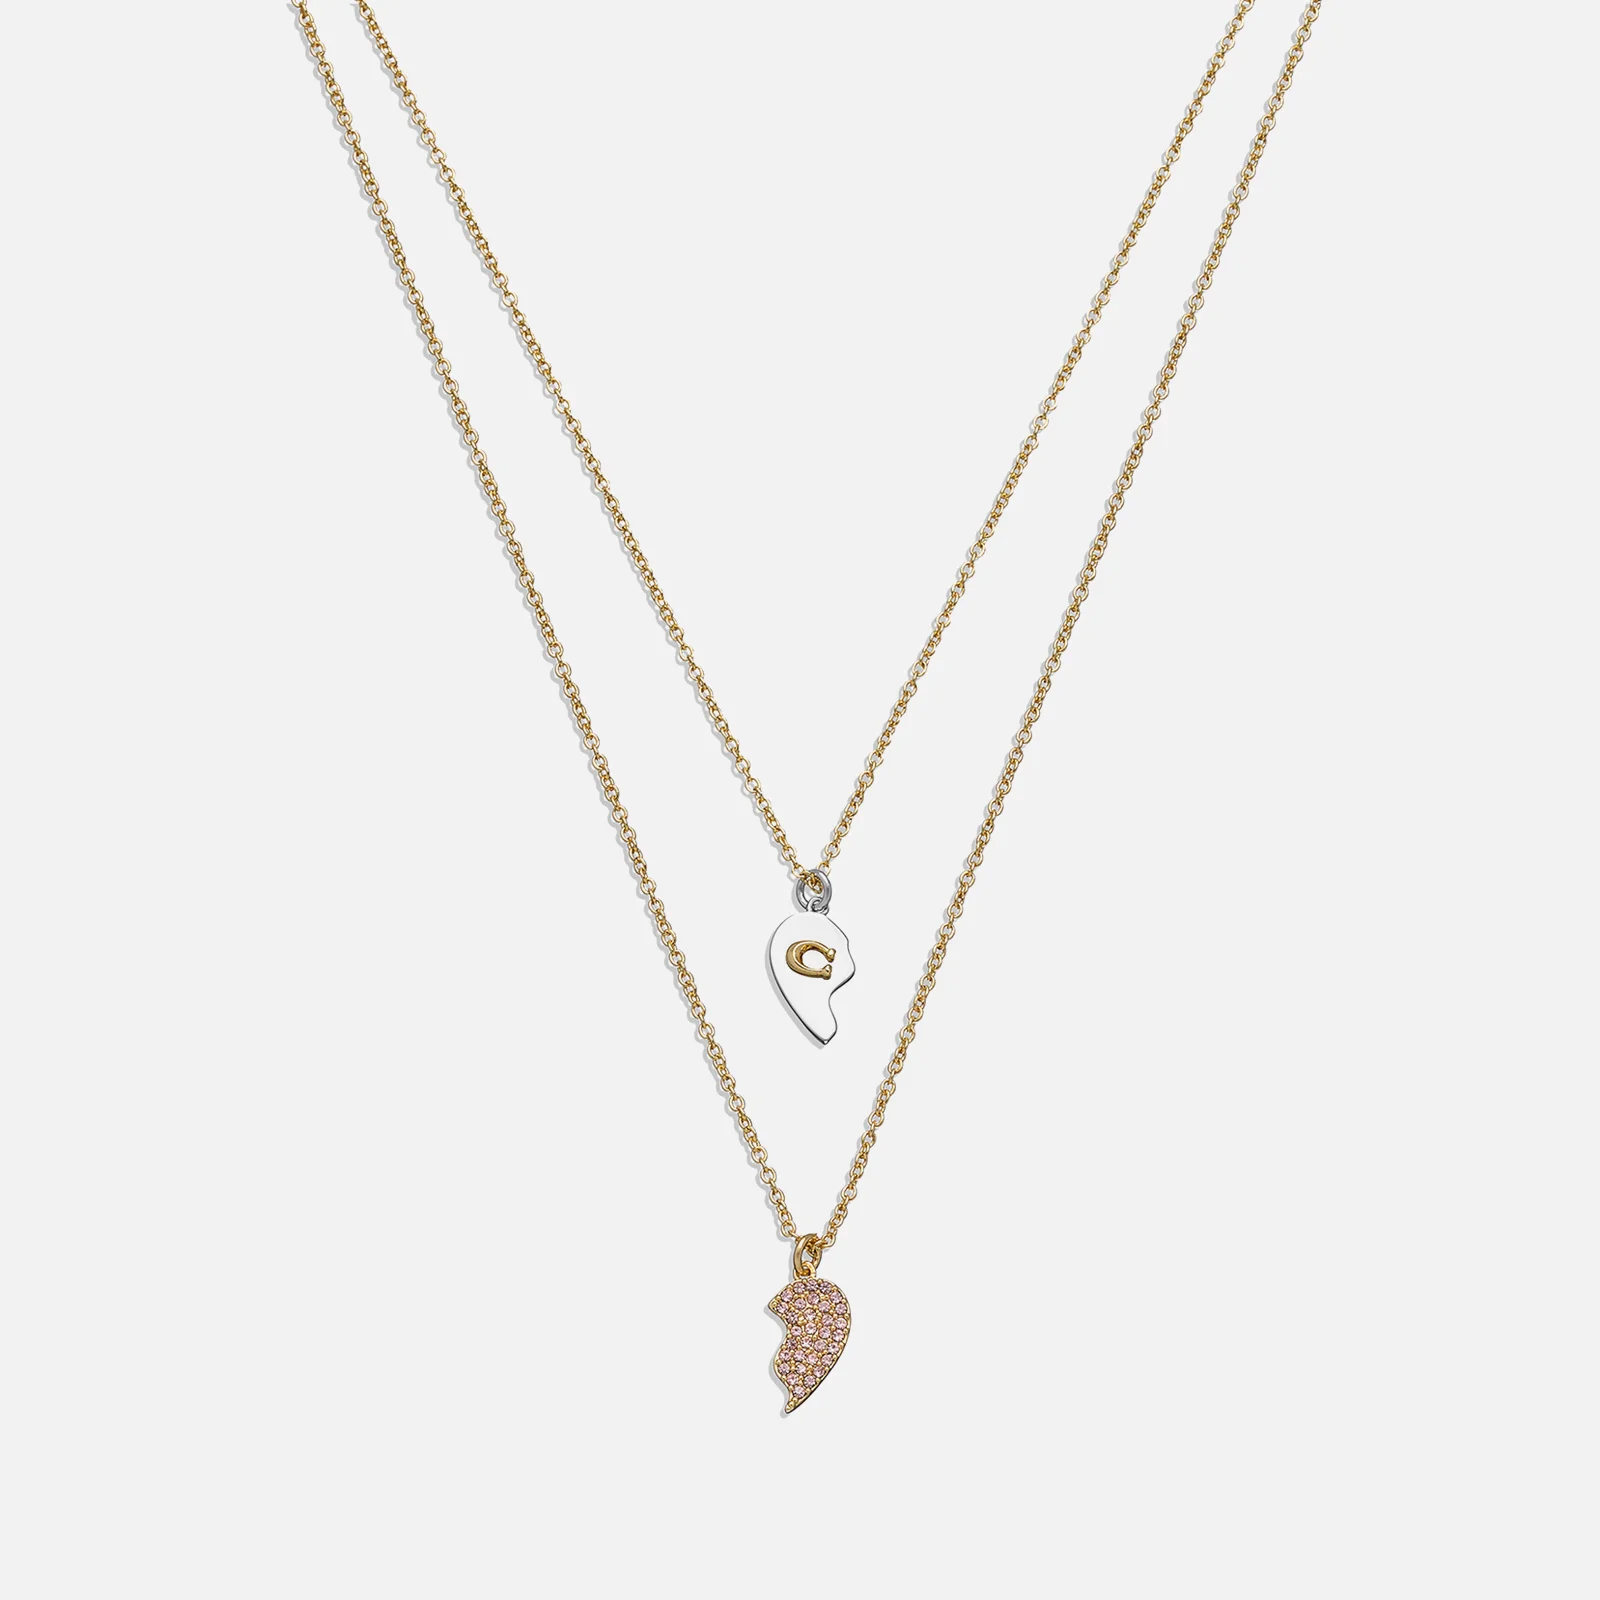 Coach Signature Broken Heart Gold-Tone Layered Necklace Image 1